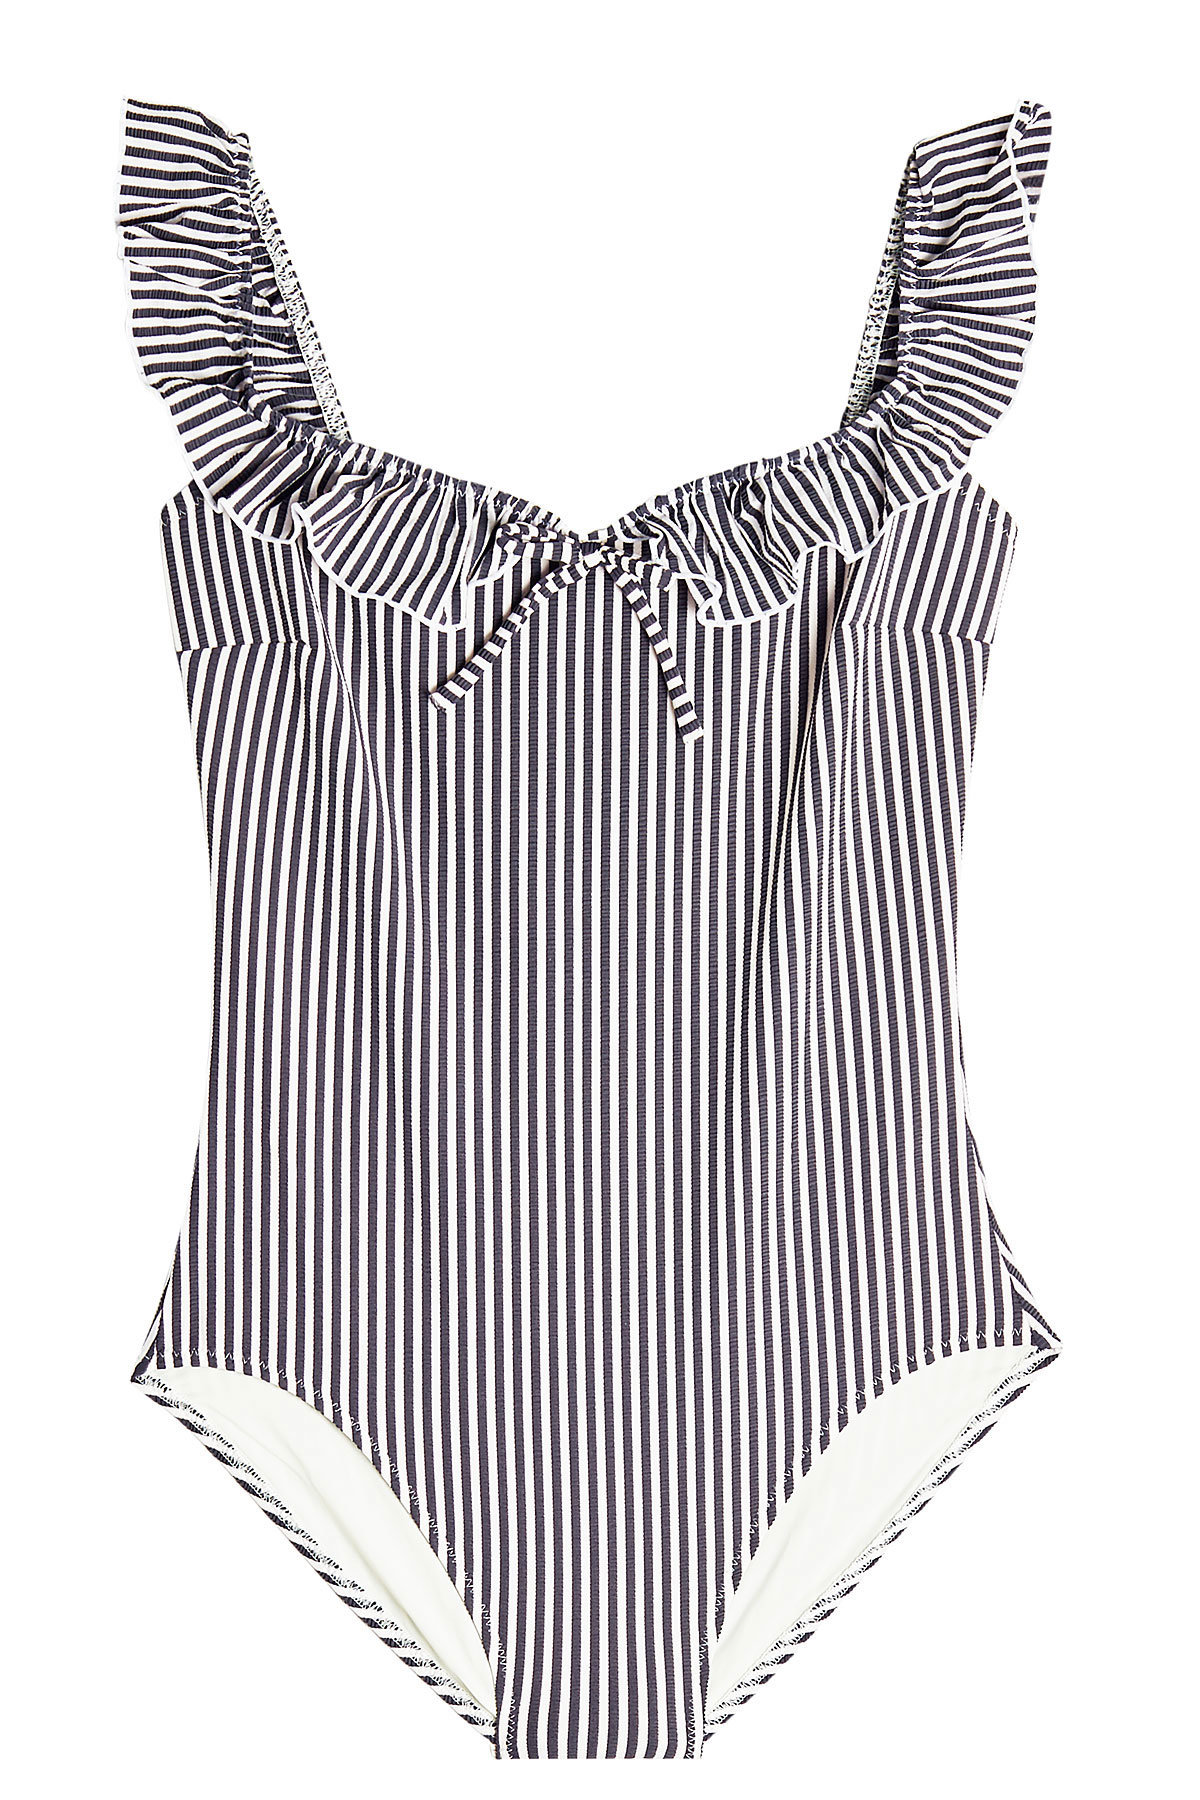 The Amelia Swimsuit by Solid & Striped